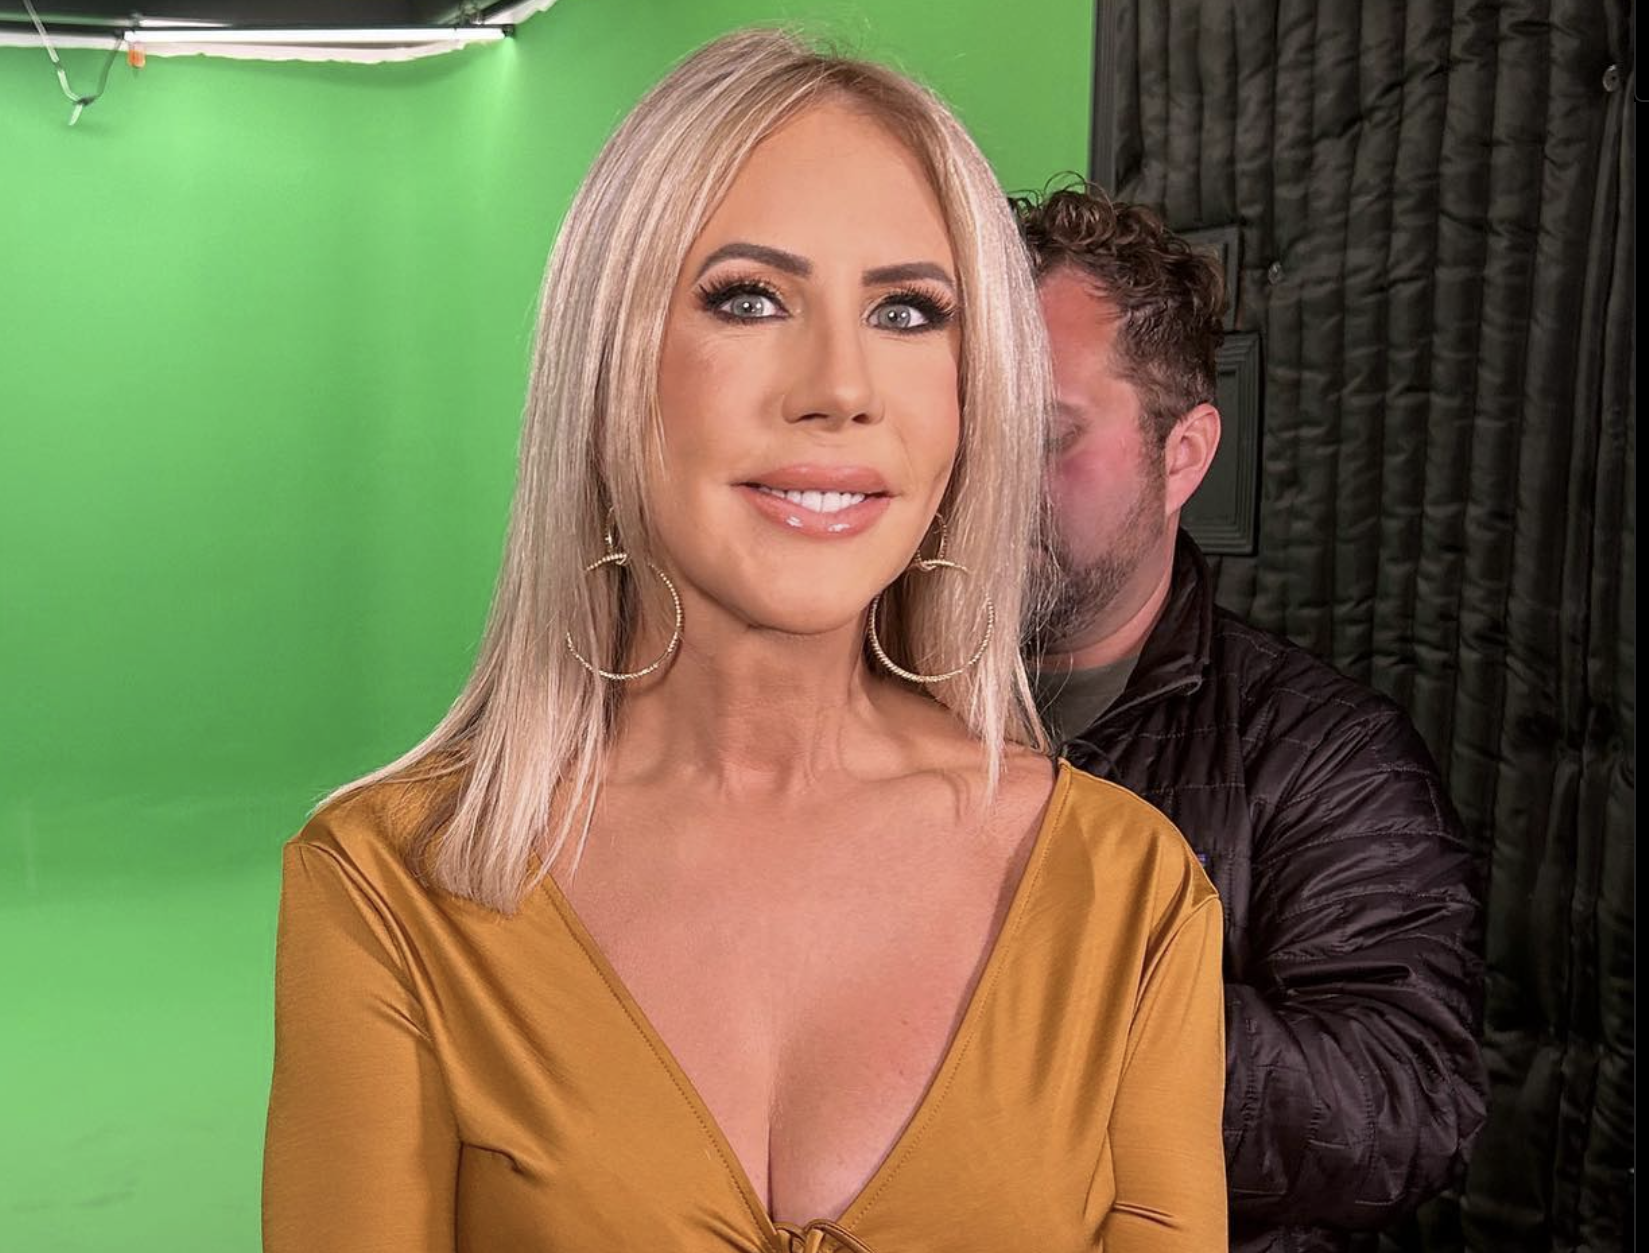 Should Vicki Return to Real Housewives of Orange County Full-time?